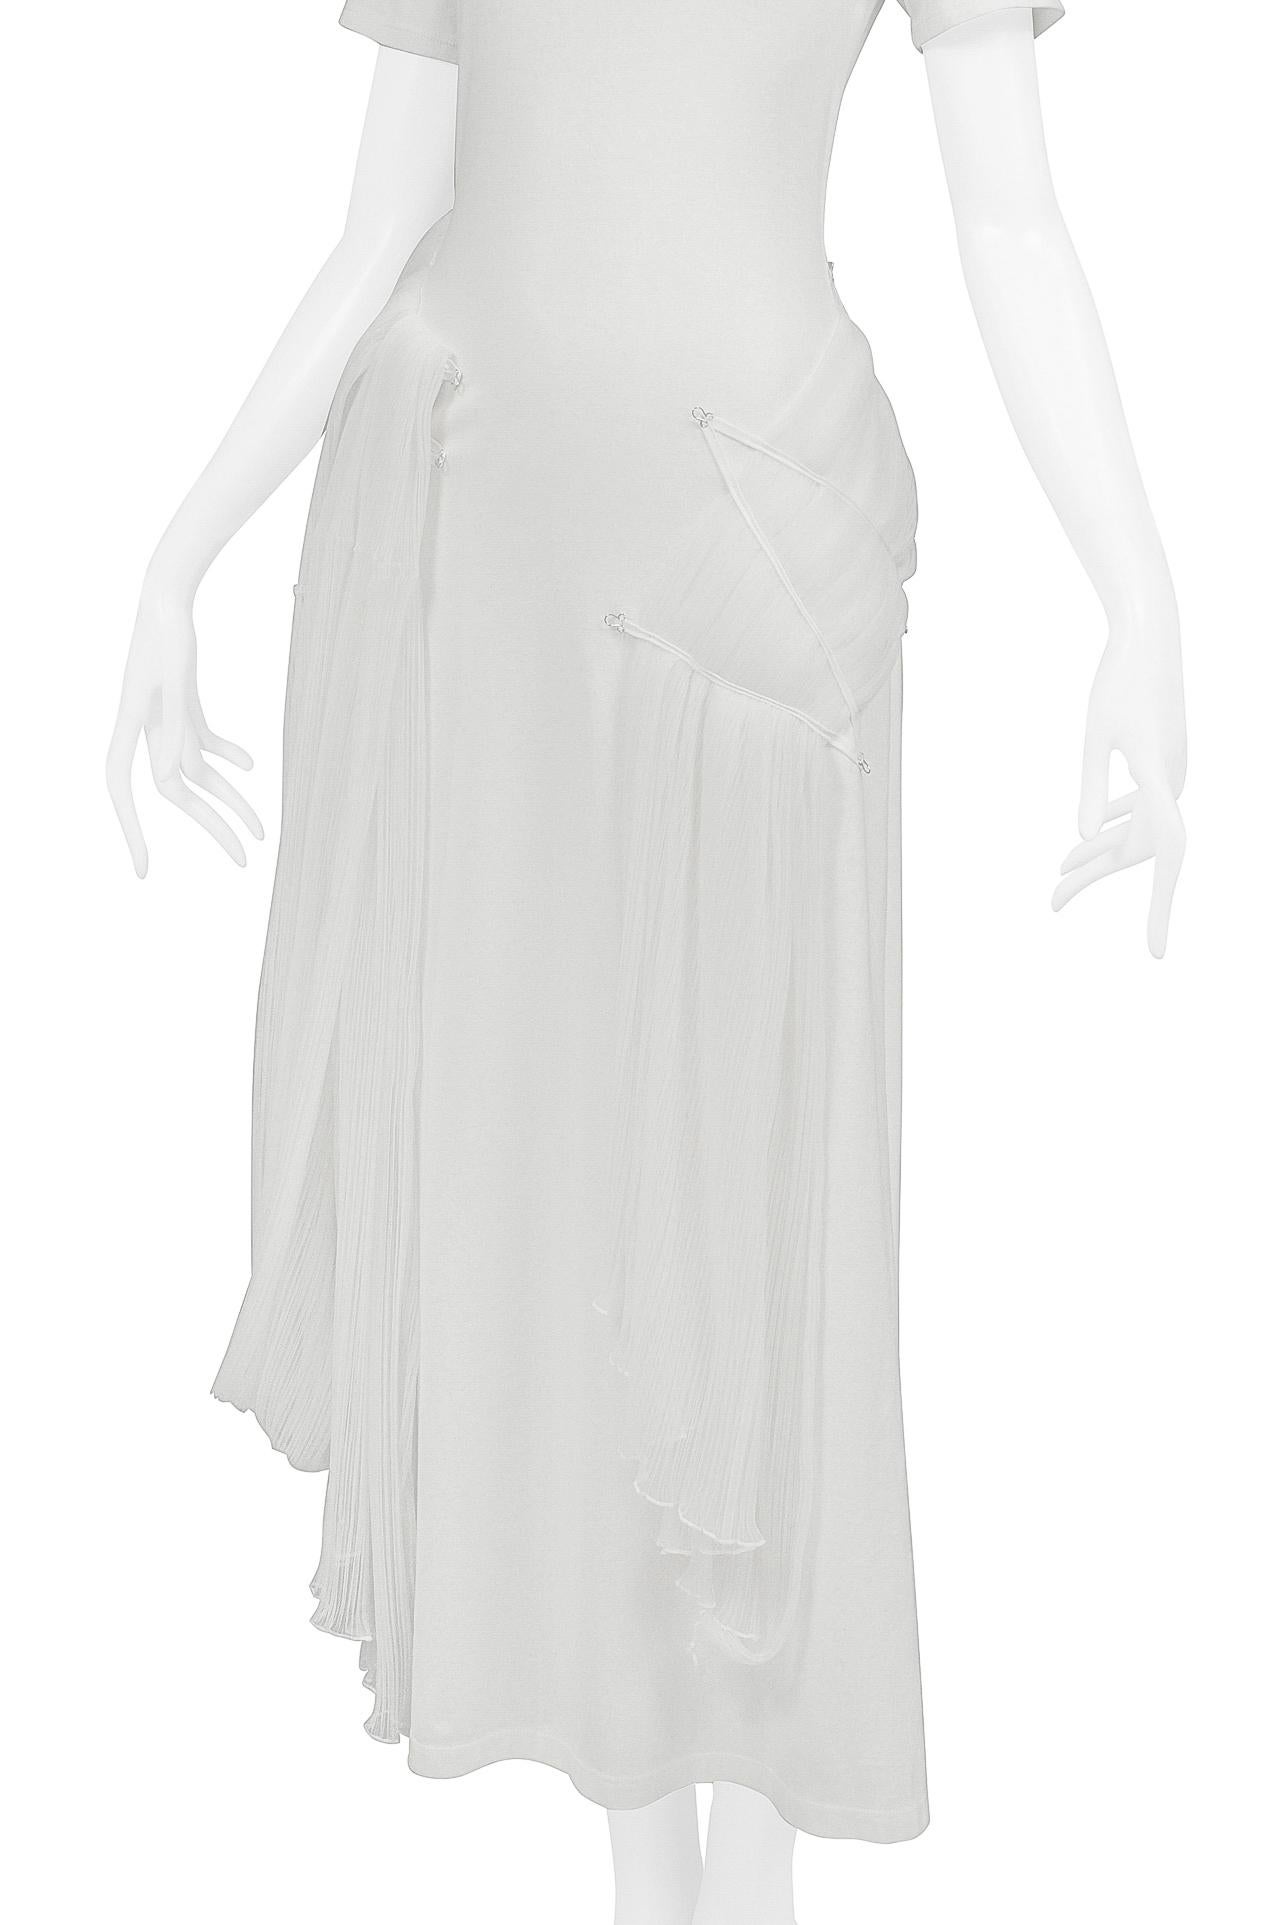 Women's Issey Miyake Iconic White Goddess Concept Dress 2003 For Sale